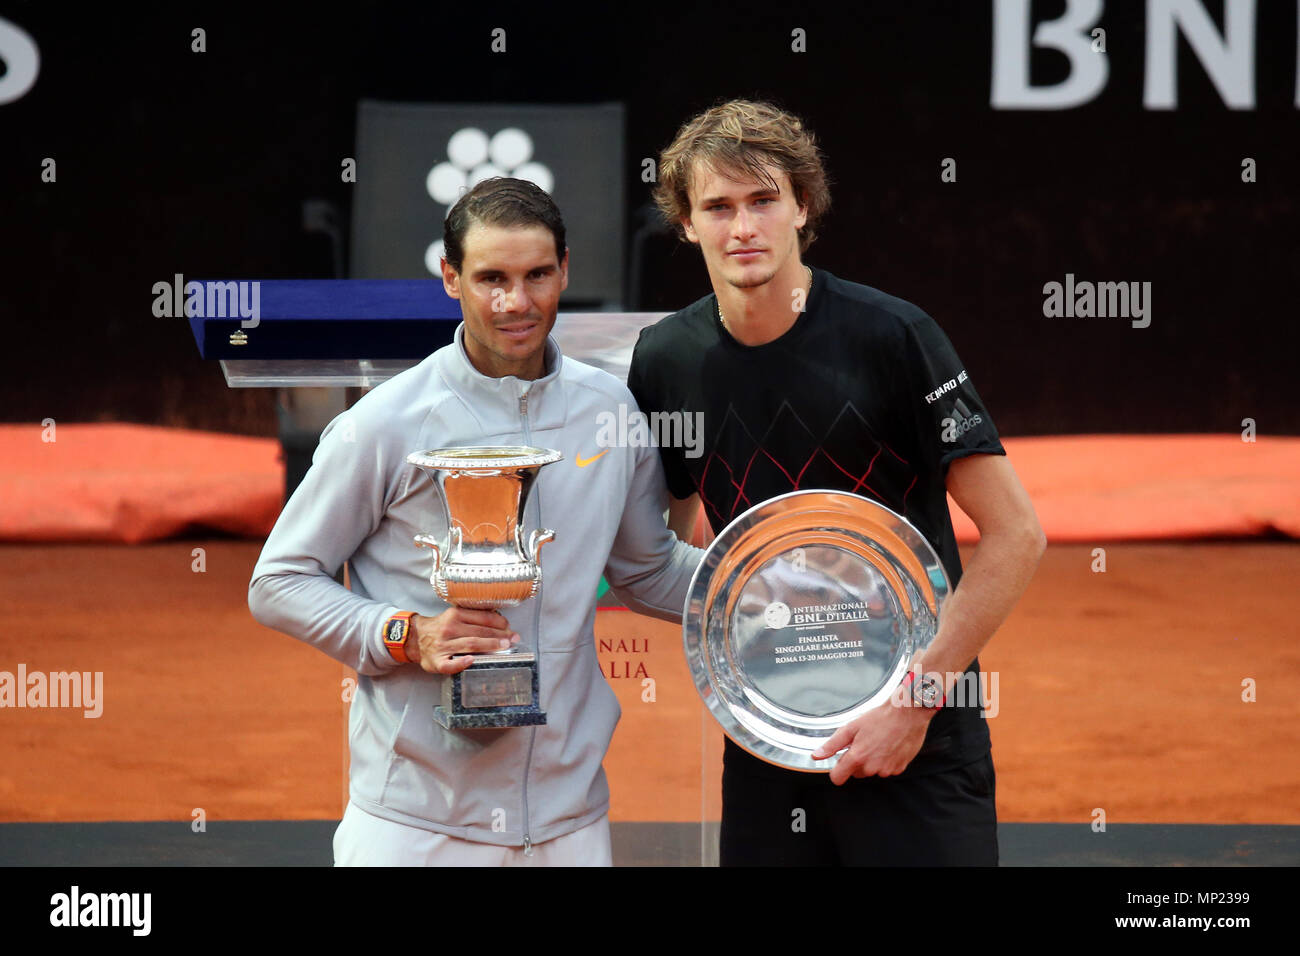 Foro Italico, Rome, Italy. 20th May, 2018. Italian Open Tennis, finals day;  (L-R) Rafael Nadal (ESP) and Alexander Zverev (GER) pose with their  trophies after their final match won by Nadal 6-1,